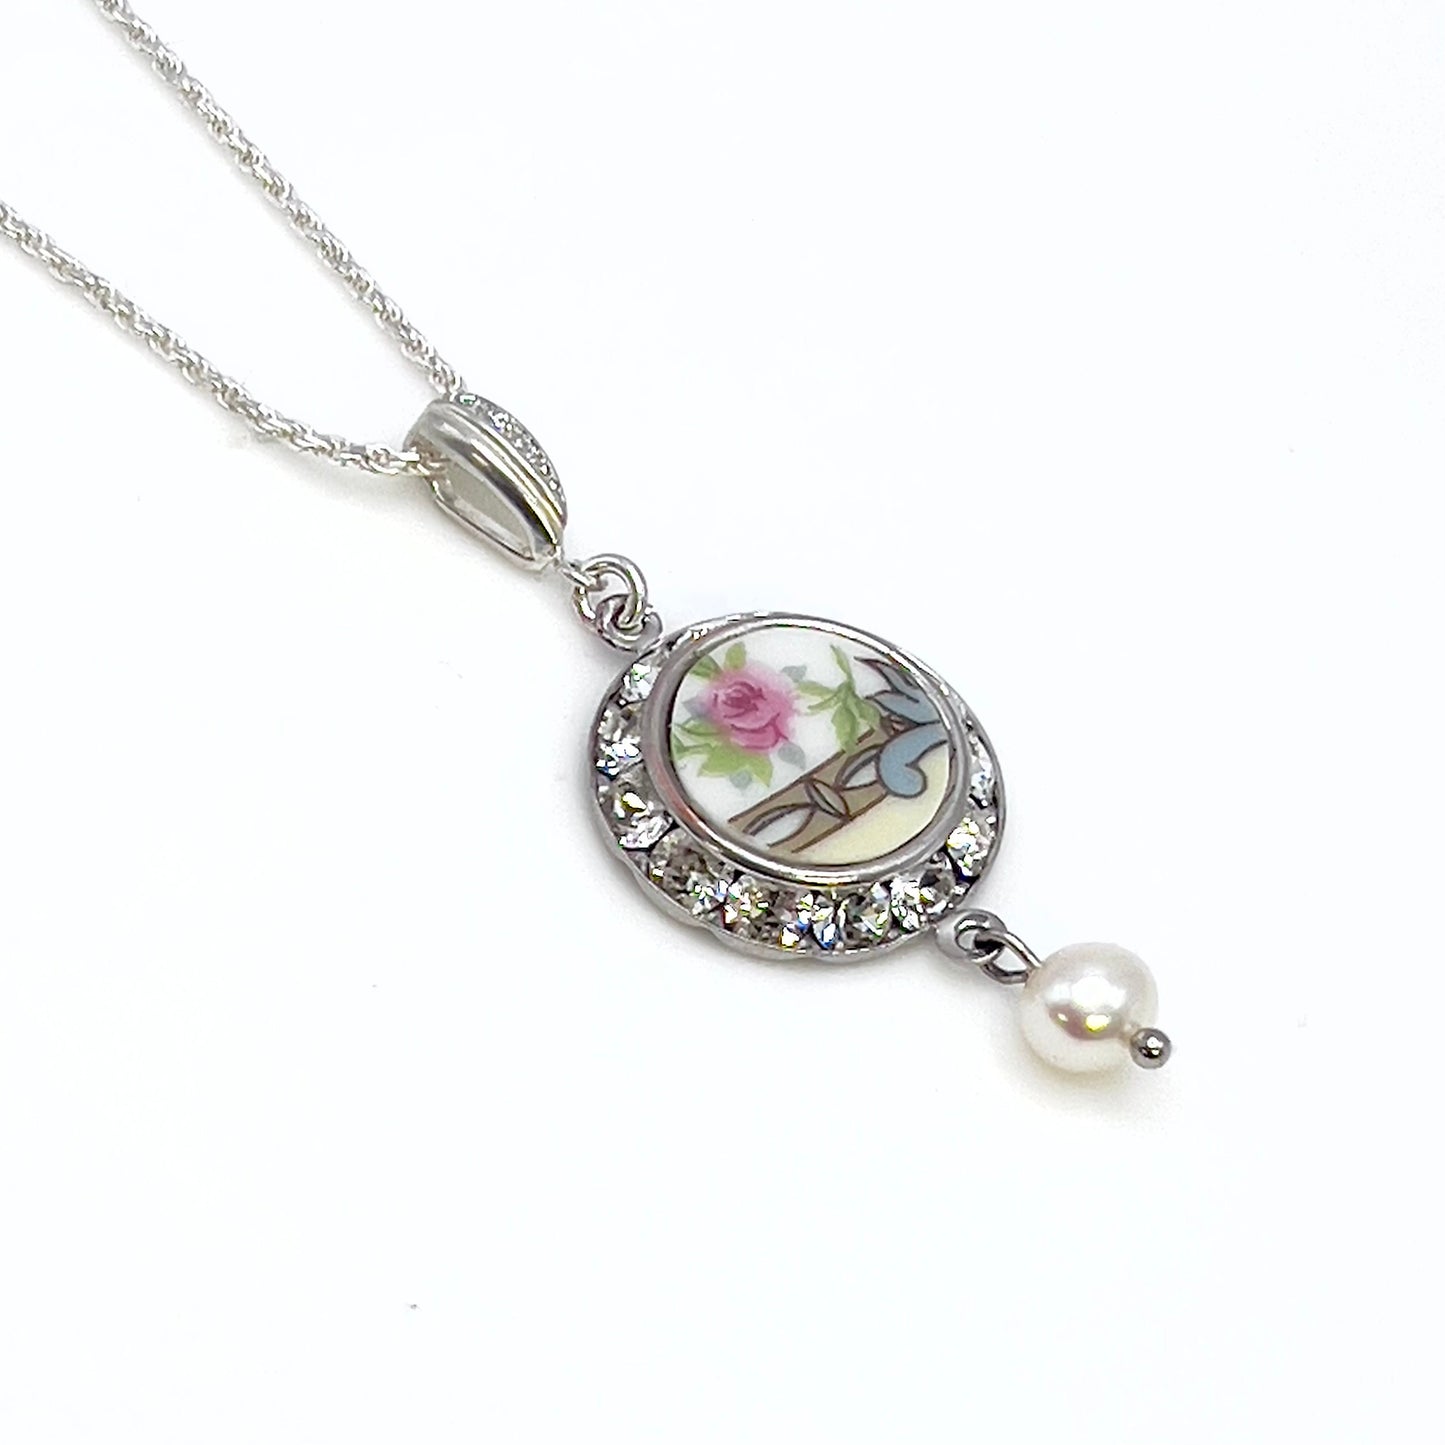 Victorian Rose China Necklace, Broken China Jewelry, Pearl Drop Necklace, Crystal Necklace, Unique Gifts for Women, Valentines Day Gift